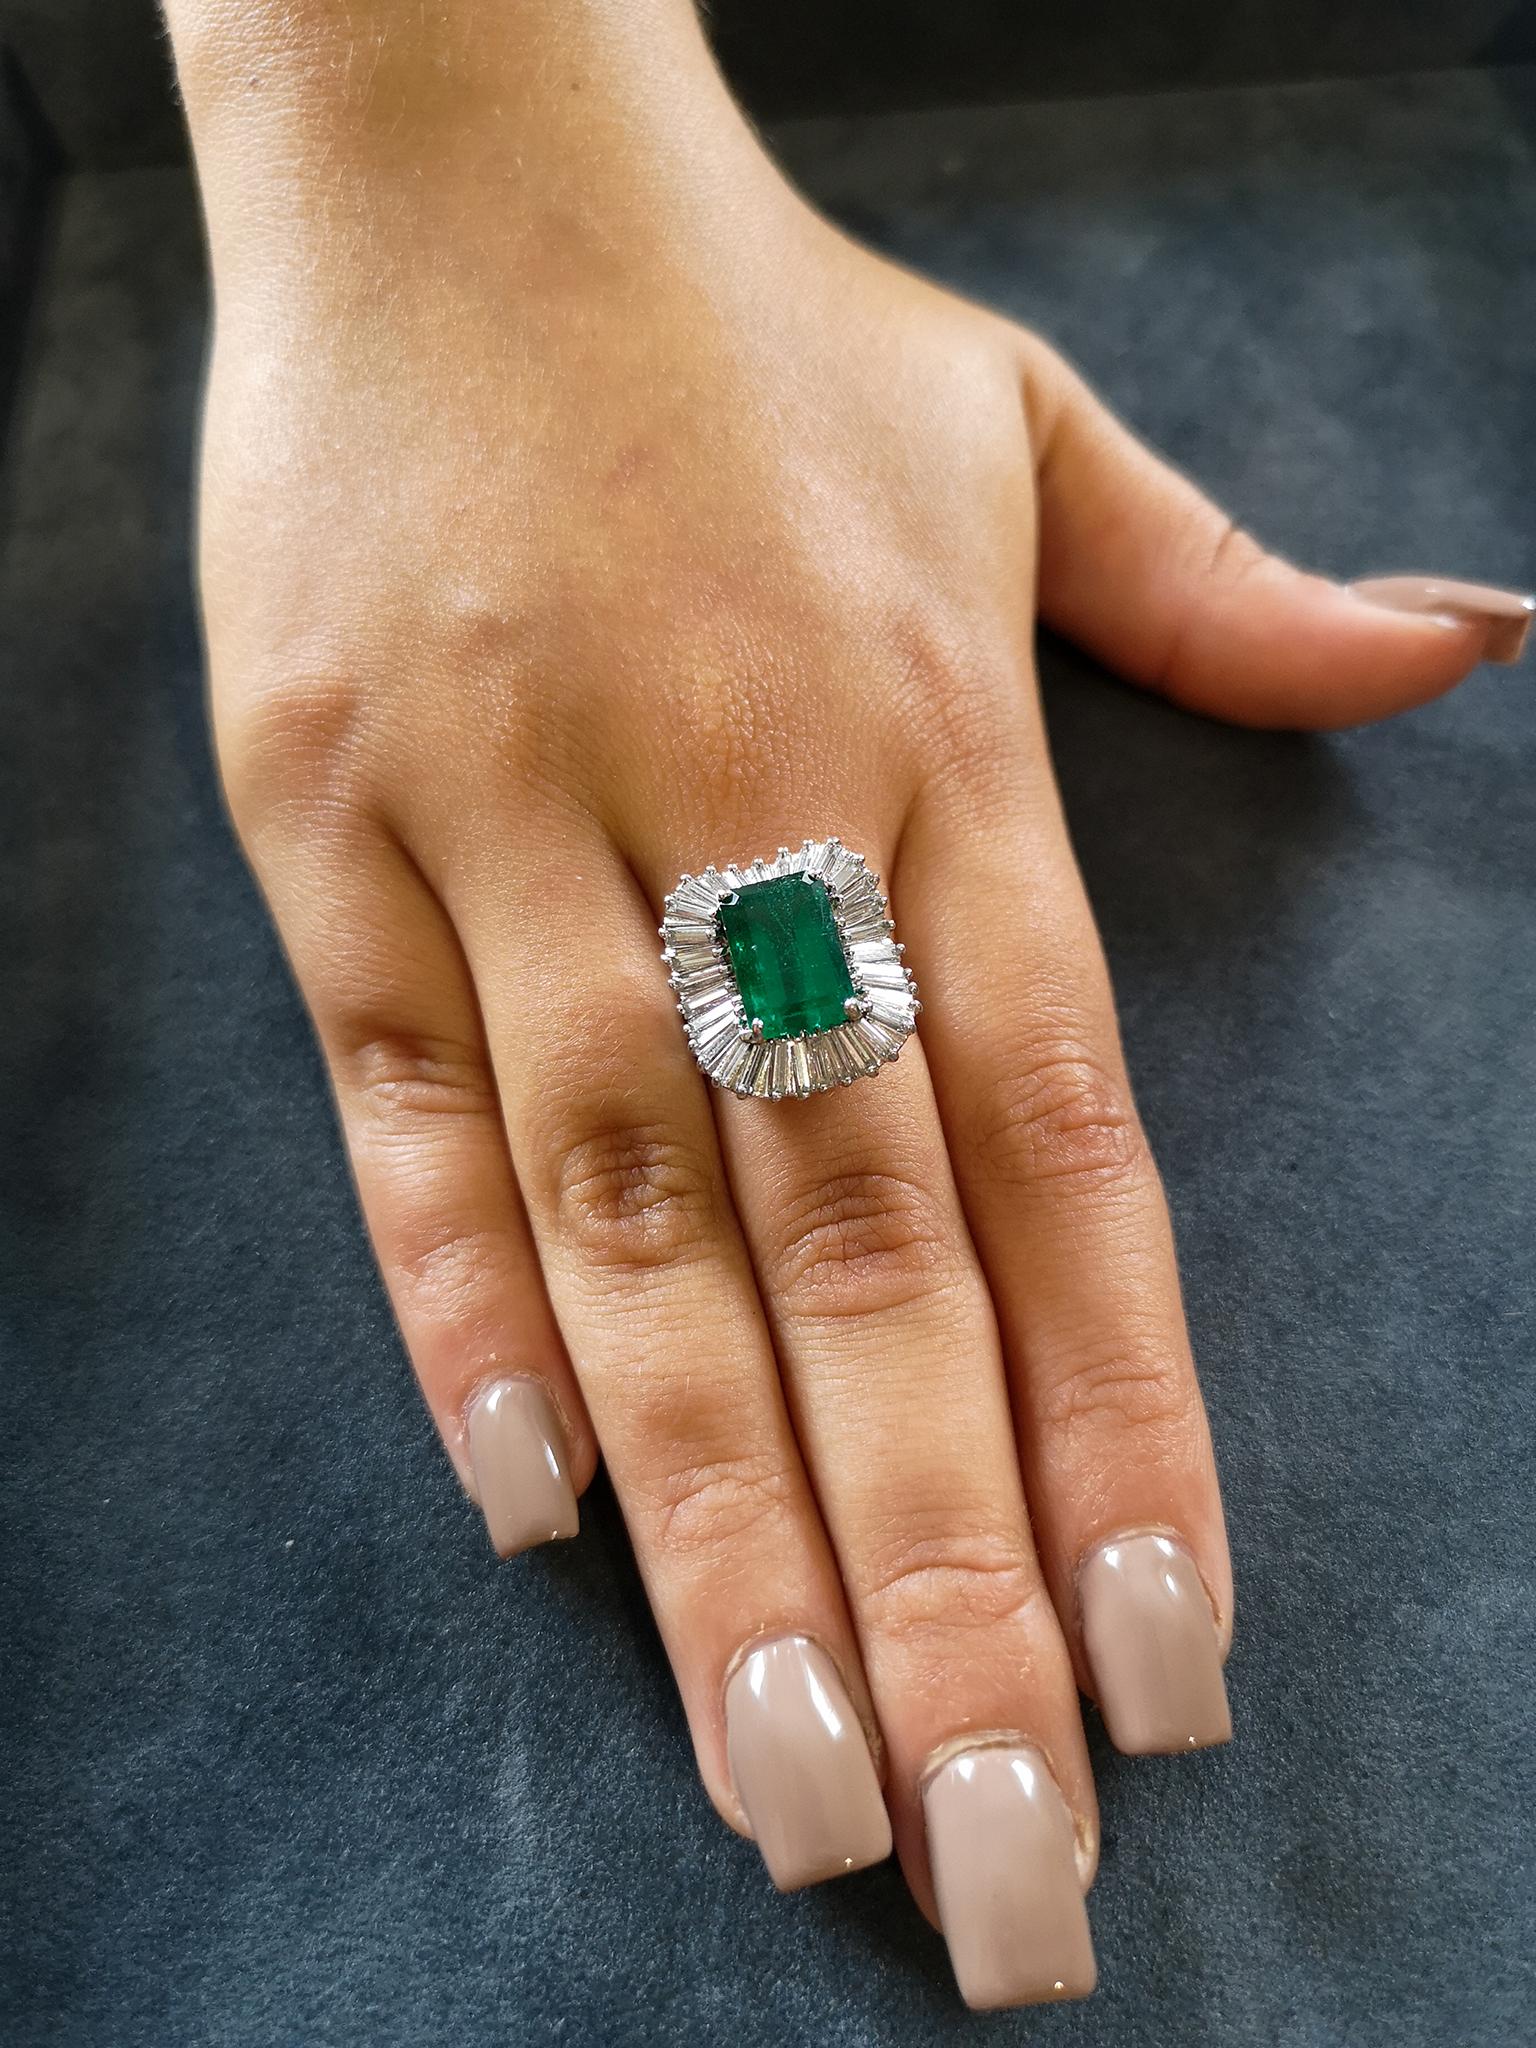  A deep, grassy green emerald-cut emerald of approximately 4.00 carats, mounted in four claws is surrounded by a undulating 'tutu' of tapered baguette-cut diamonds, approximately 1.50 carats in total, H colour, SI clarity. The reeded shank